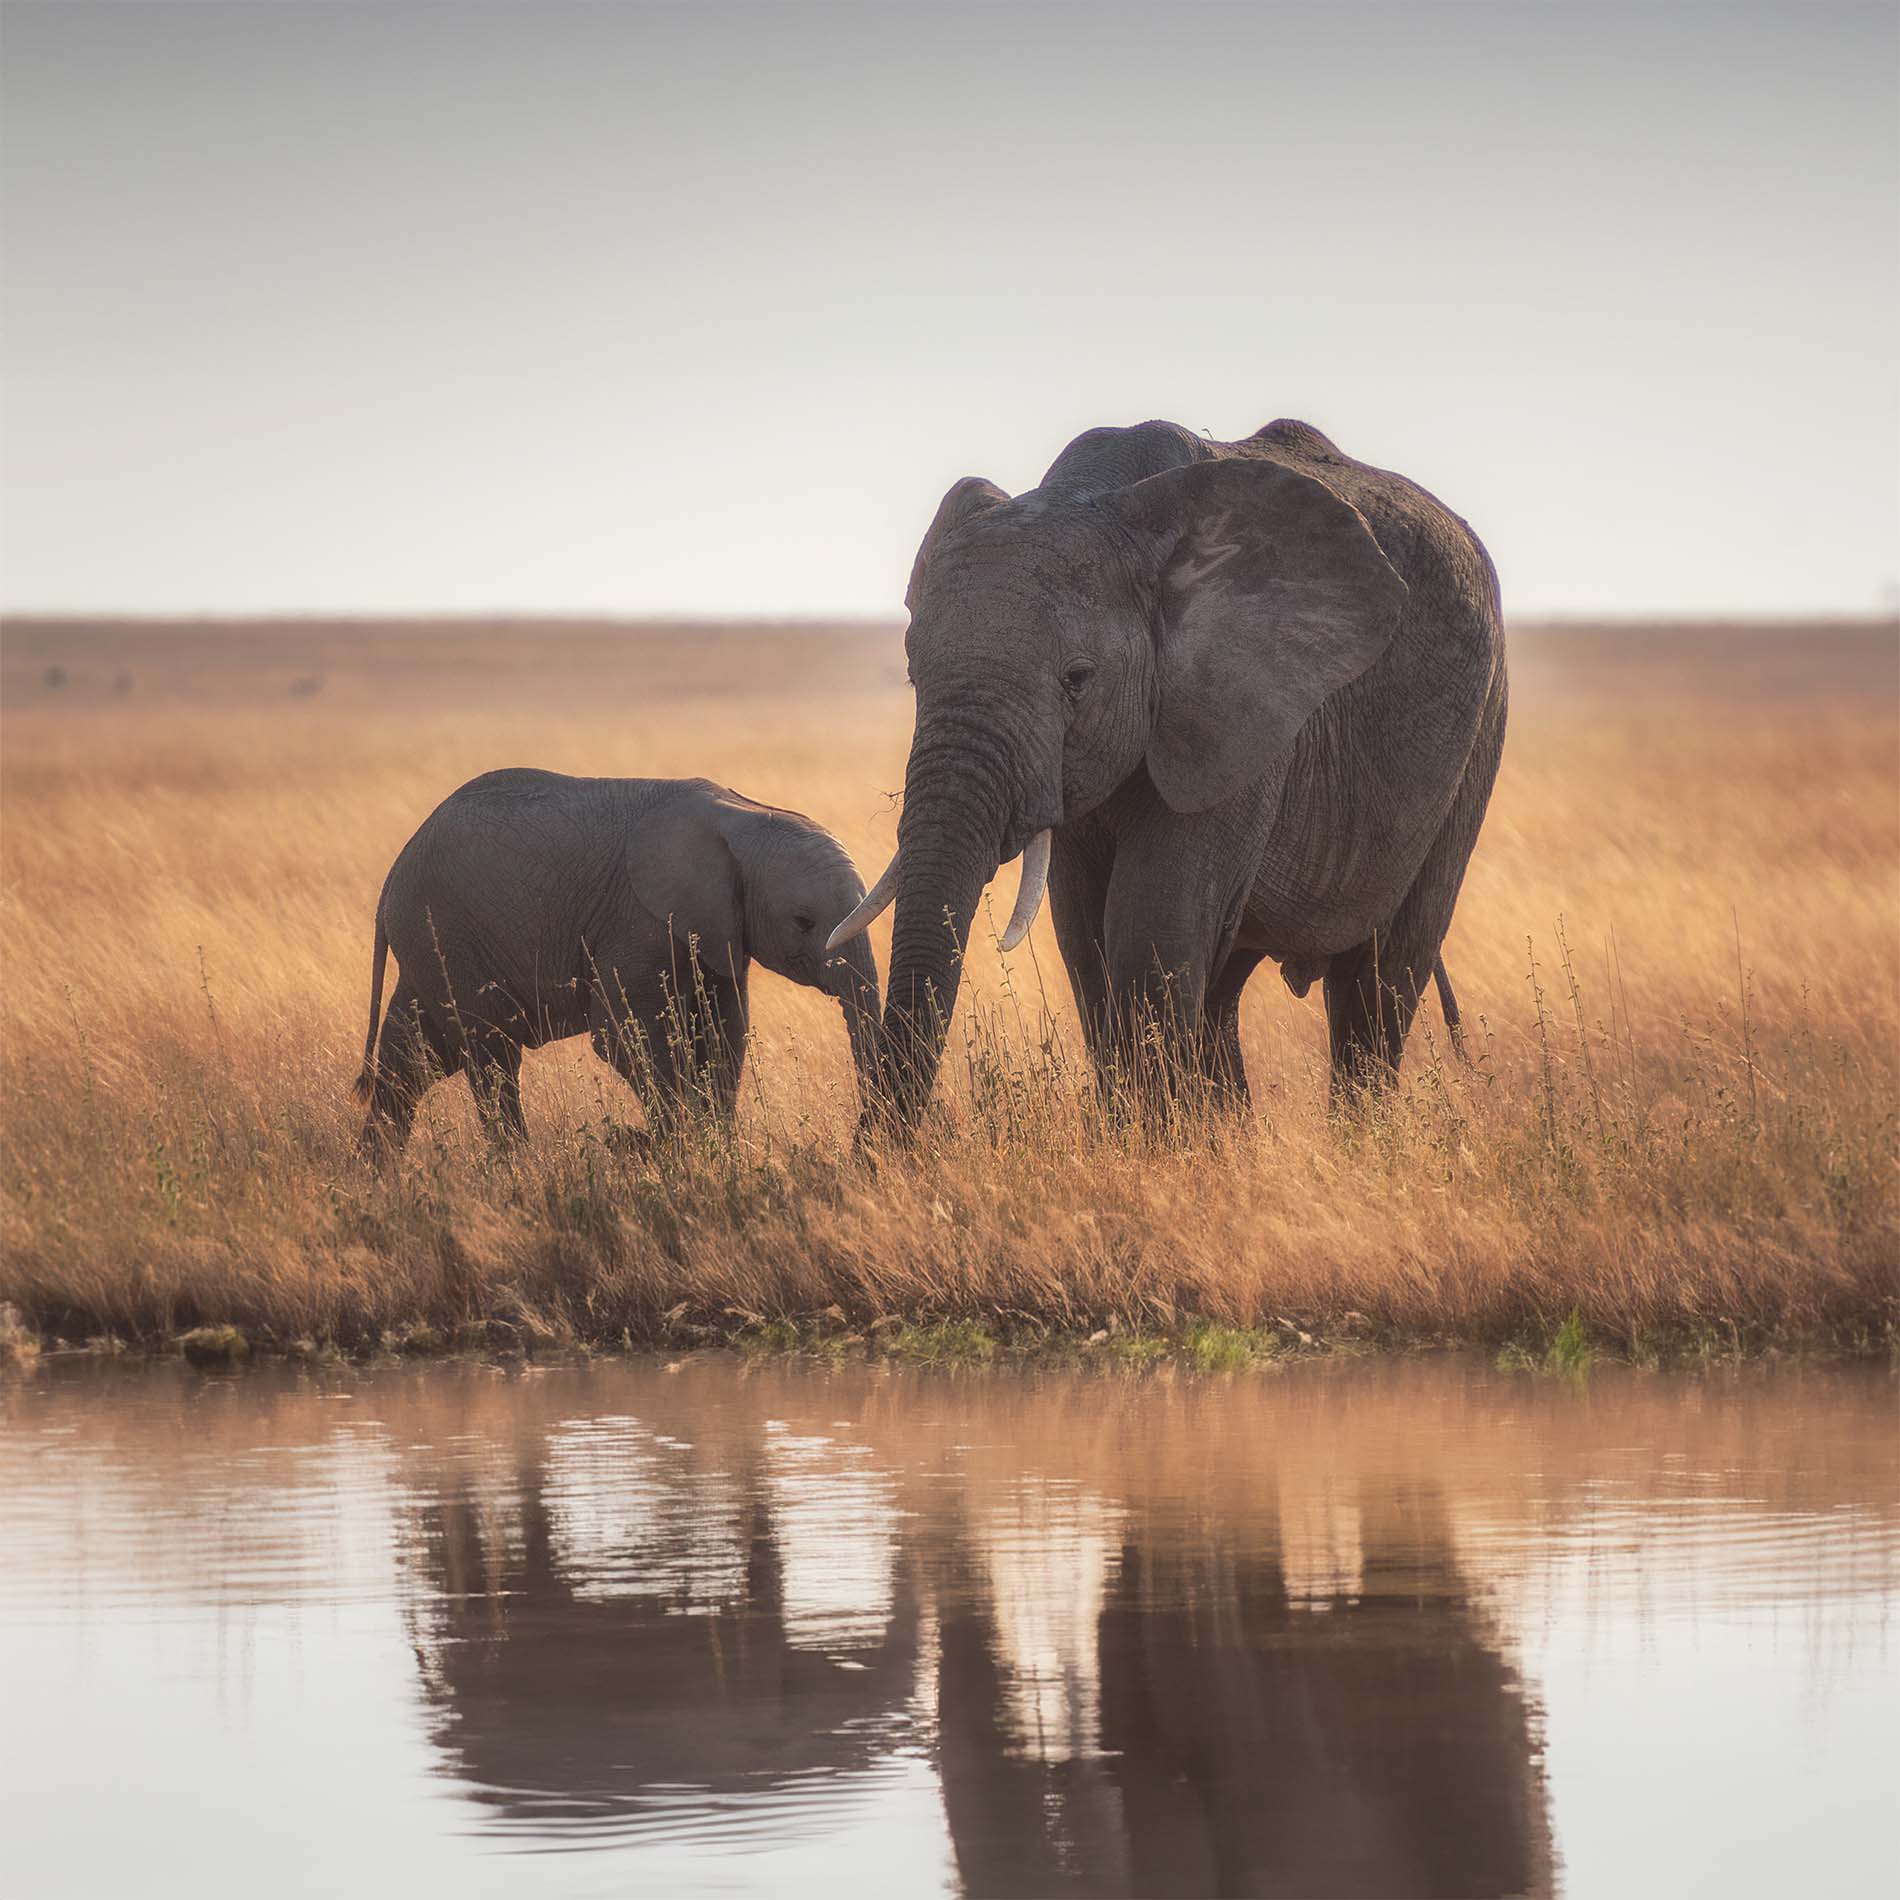 A baby elephant and an adult elephant browse in tall wheat-colored grass next to a body of water at sunset.